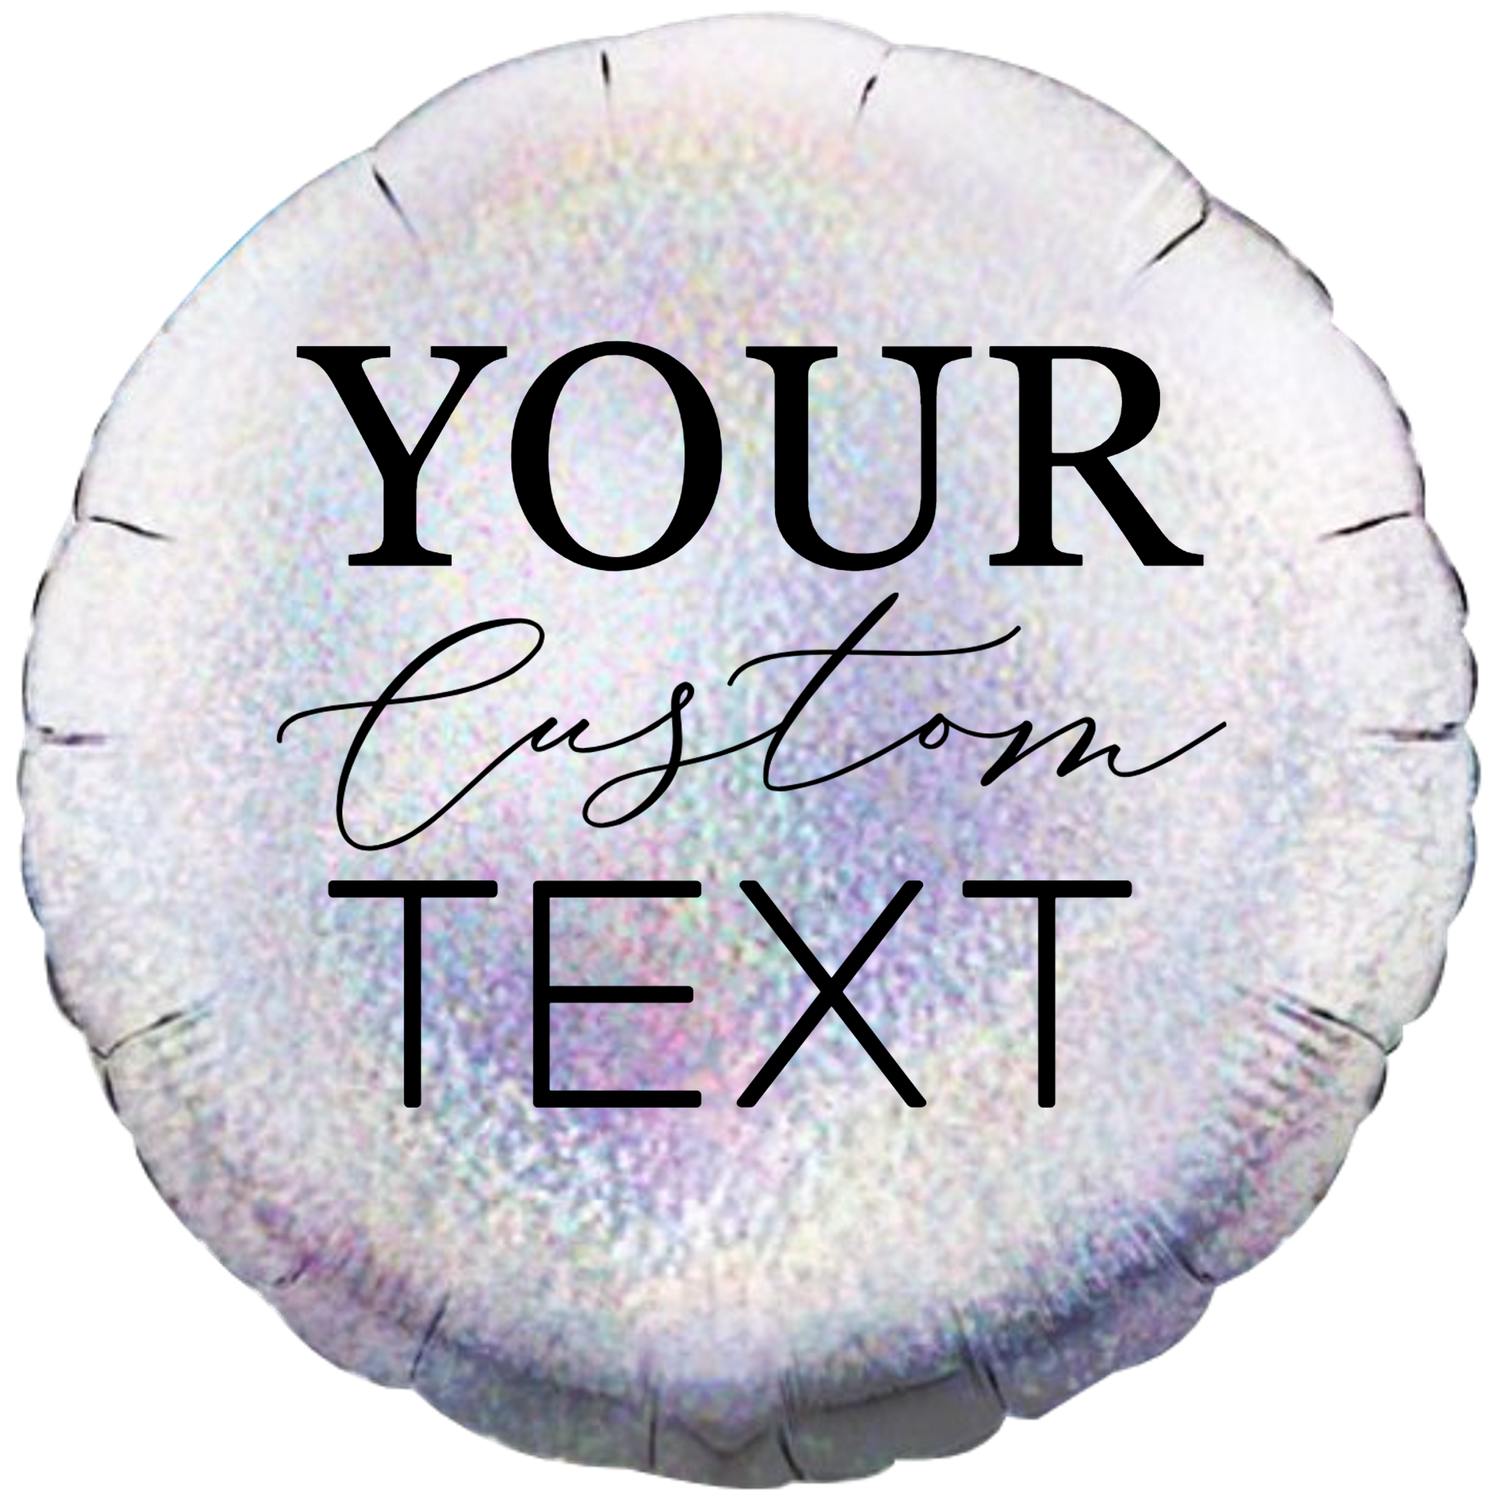 Custom Name/Text Foil/Mylar Holographic Silver Round Balloons For Birthday Parties, Wedding Anniversaries, Marriage Proposals, Baby Shower, Baby Welcoming, Graduation Ceremony, Bachelorette Parties, Bridal Shower, Festivals, Occasions and Corporate Events. Supports Helium/Air, Luxury Bespoke Balloons Are a Perfect Surprise For Your Baby, Wife, Mom, Dad.